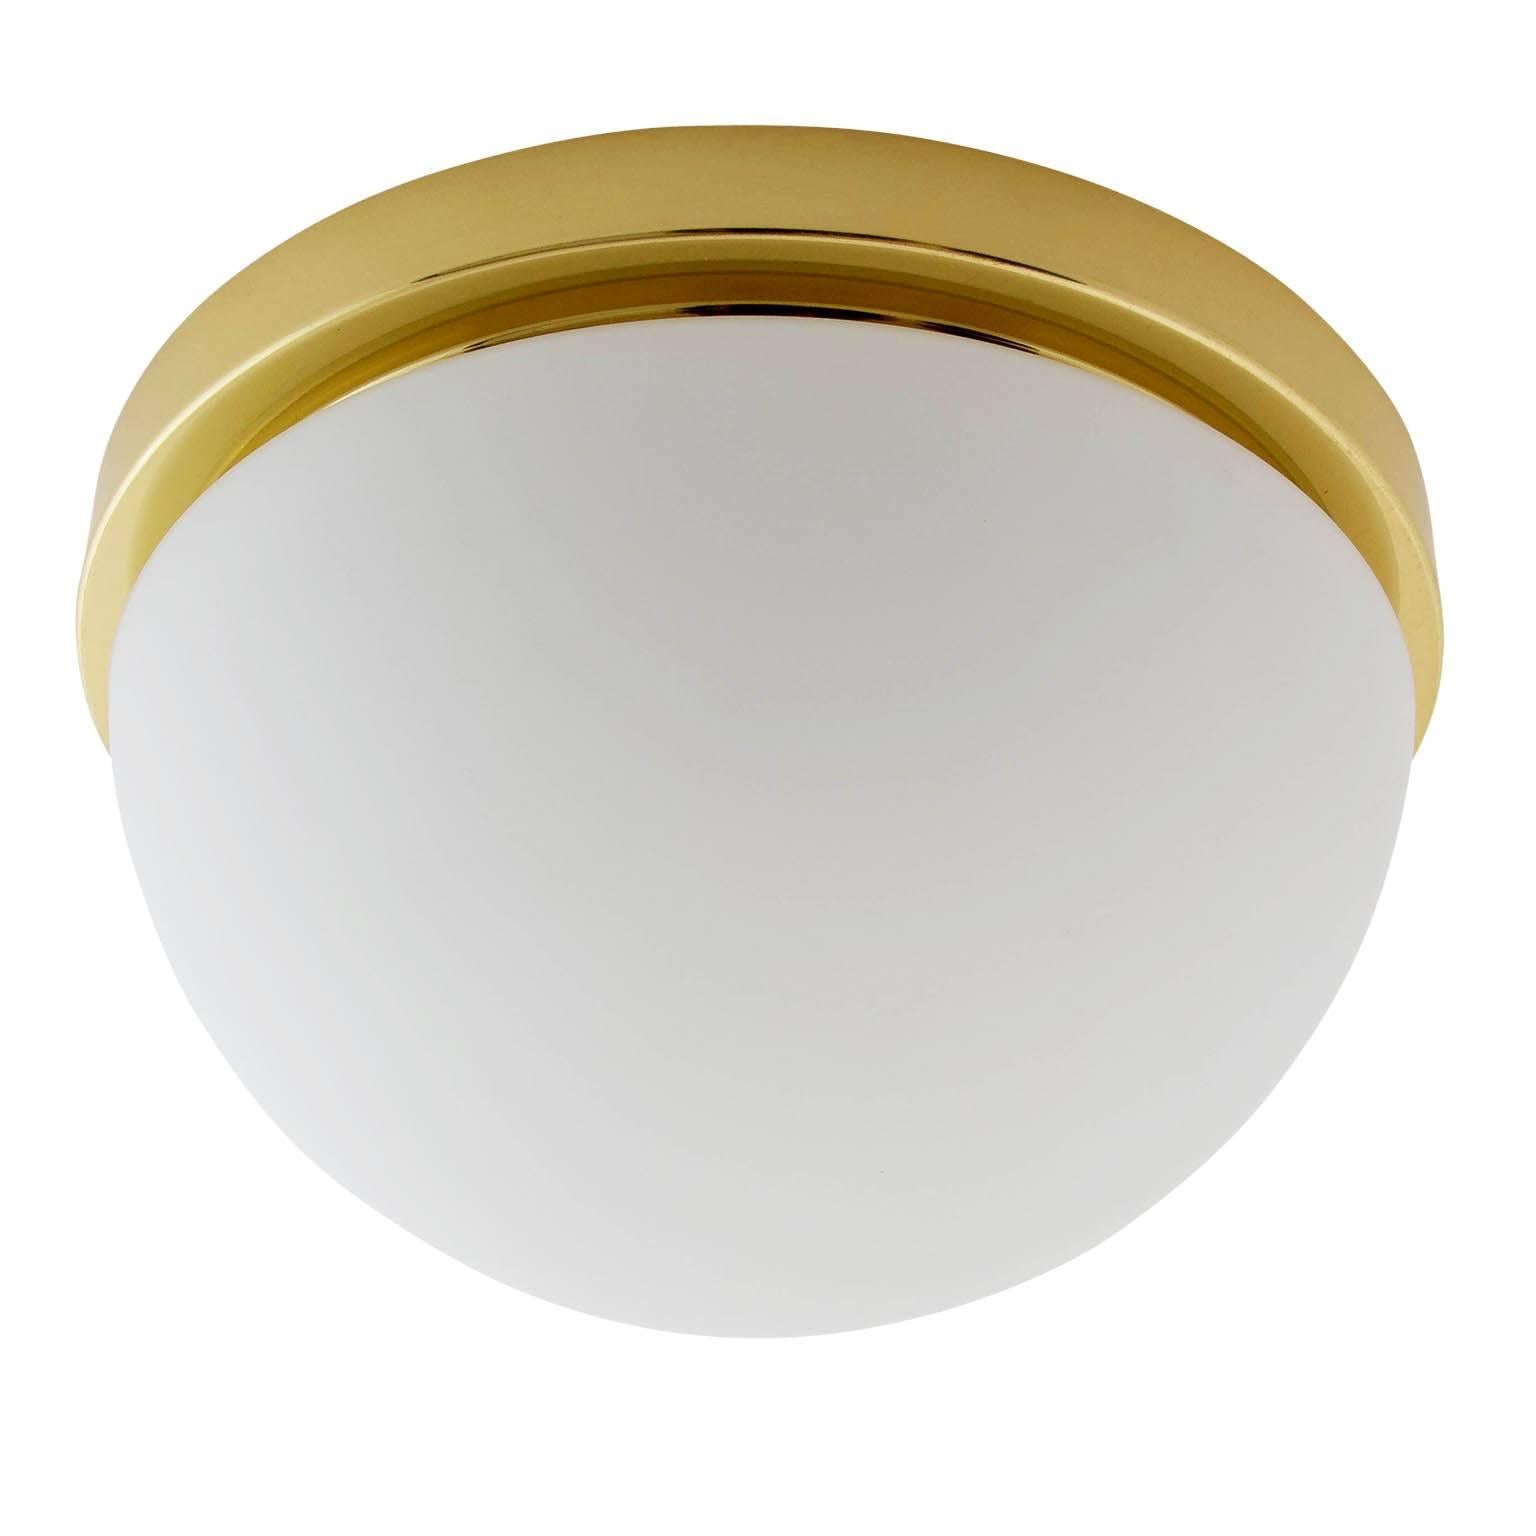 One of eight flush mount or wall lights by Glashütte Limburg, manufactured in midcentury, circa 1970.
They are made of a polished brass armature with a dome shaped opal glass lampshade. Labelled with Glashütte Limburg.
The price is per light. They